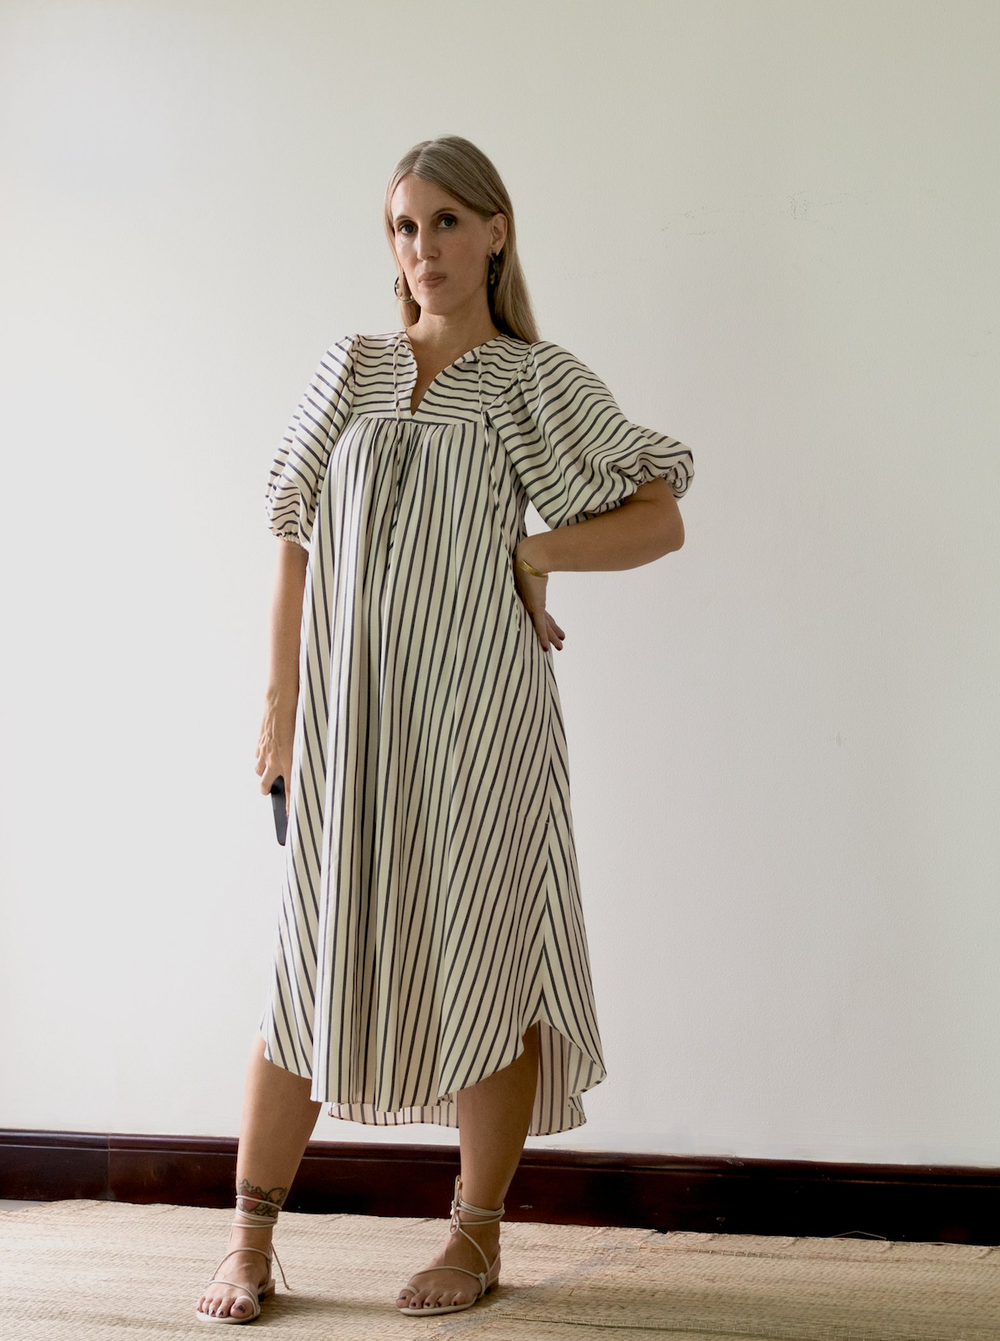 Woman wearing the Vali Dress sewing pattern from Pattern Fantastique on The Fold Line. A dress pattern made in viscose, silks, linen or cotton fabrics, featuring a high round neck with narrow V front opening with tie, sleeve and yoke gathers, topstitched 